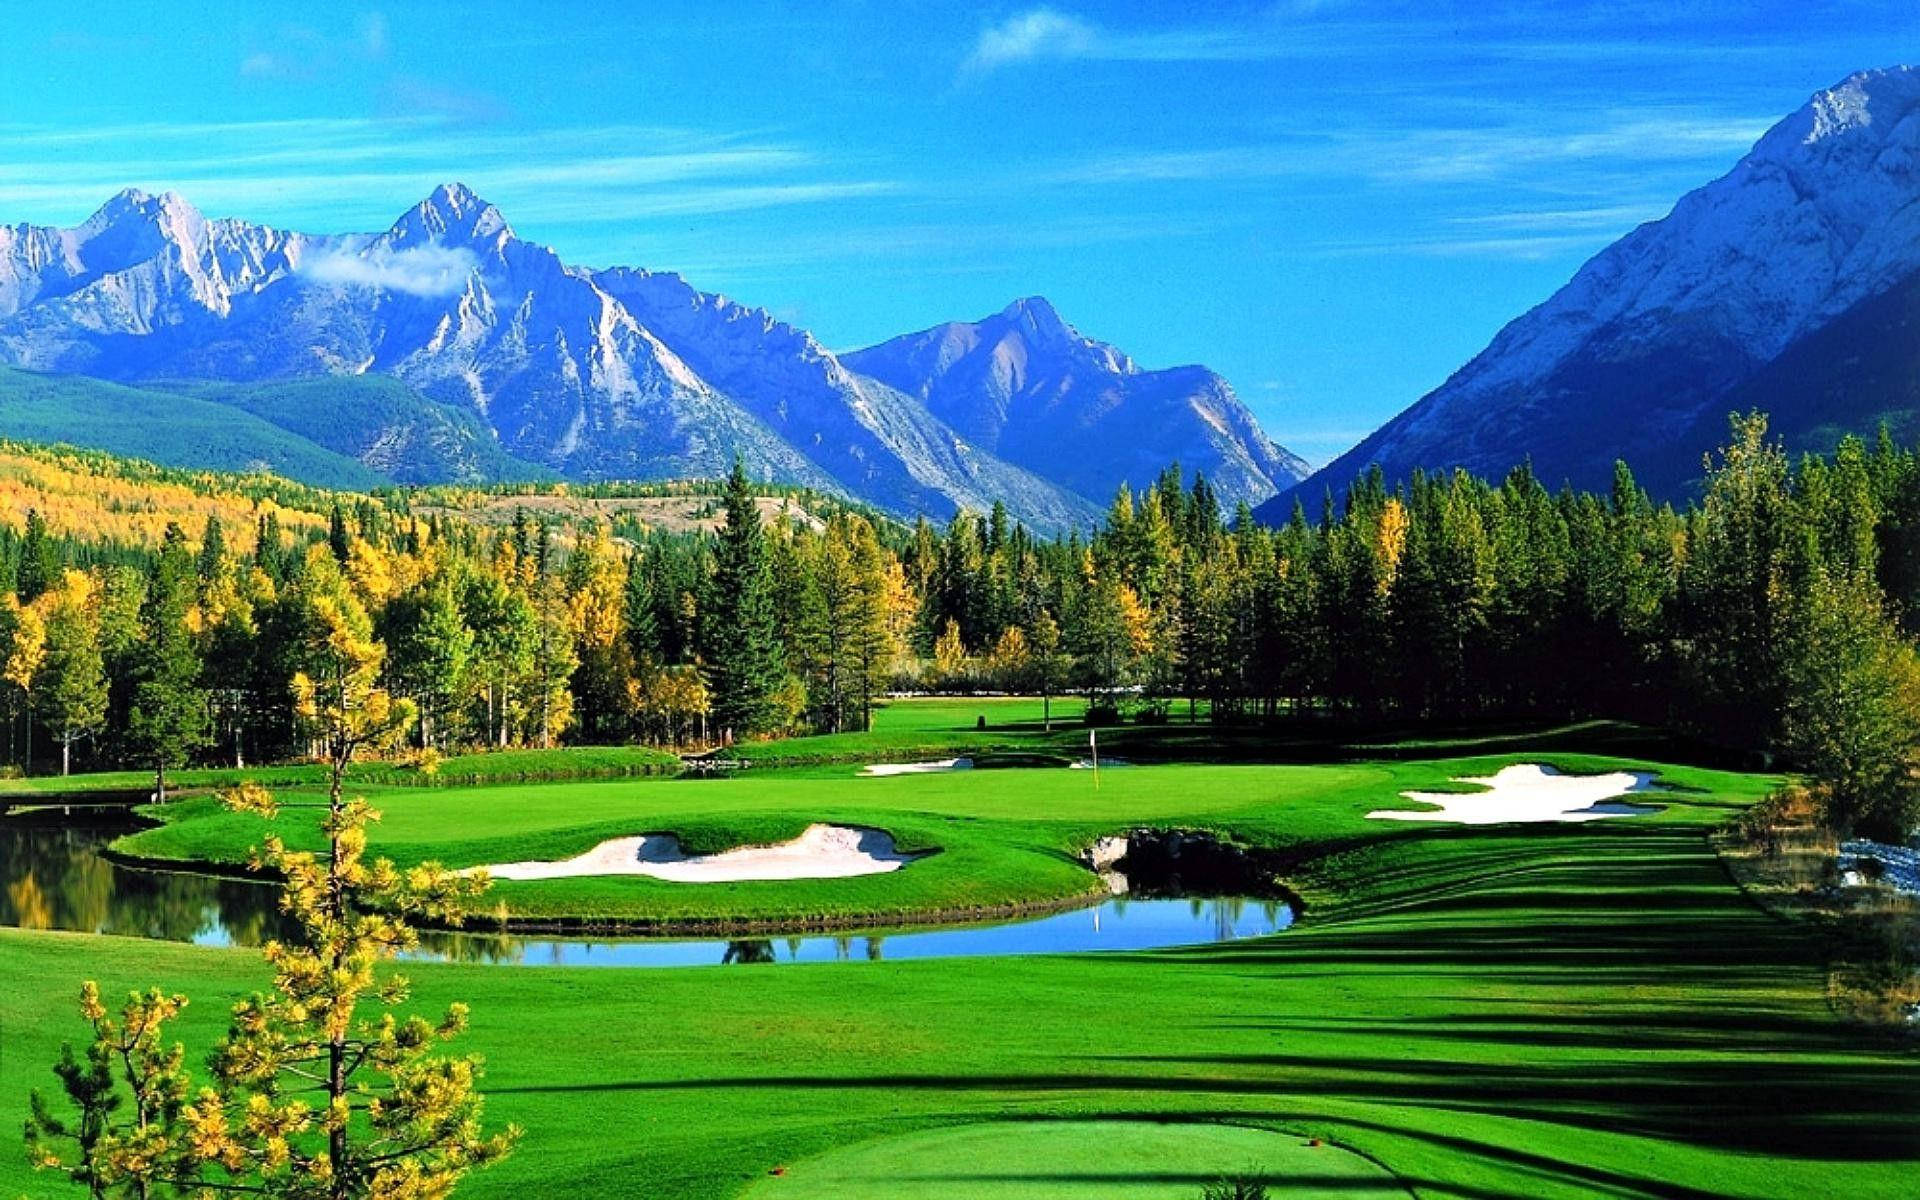 Golf Course On Galaxy Tablet Wallpaper